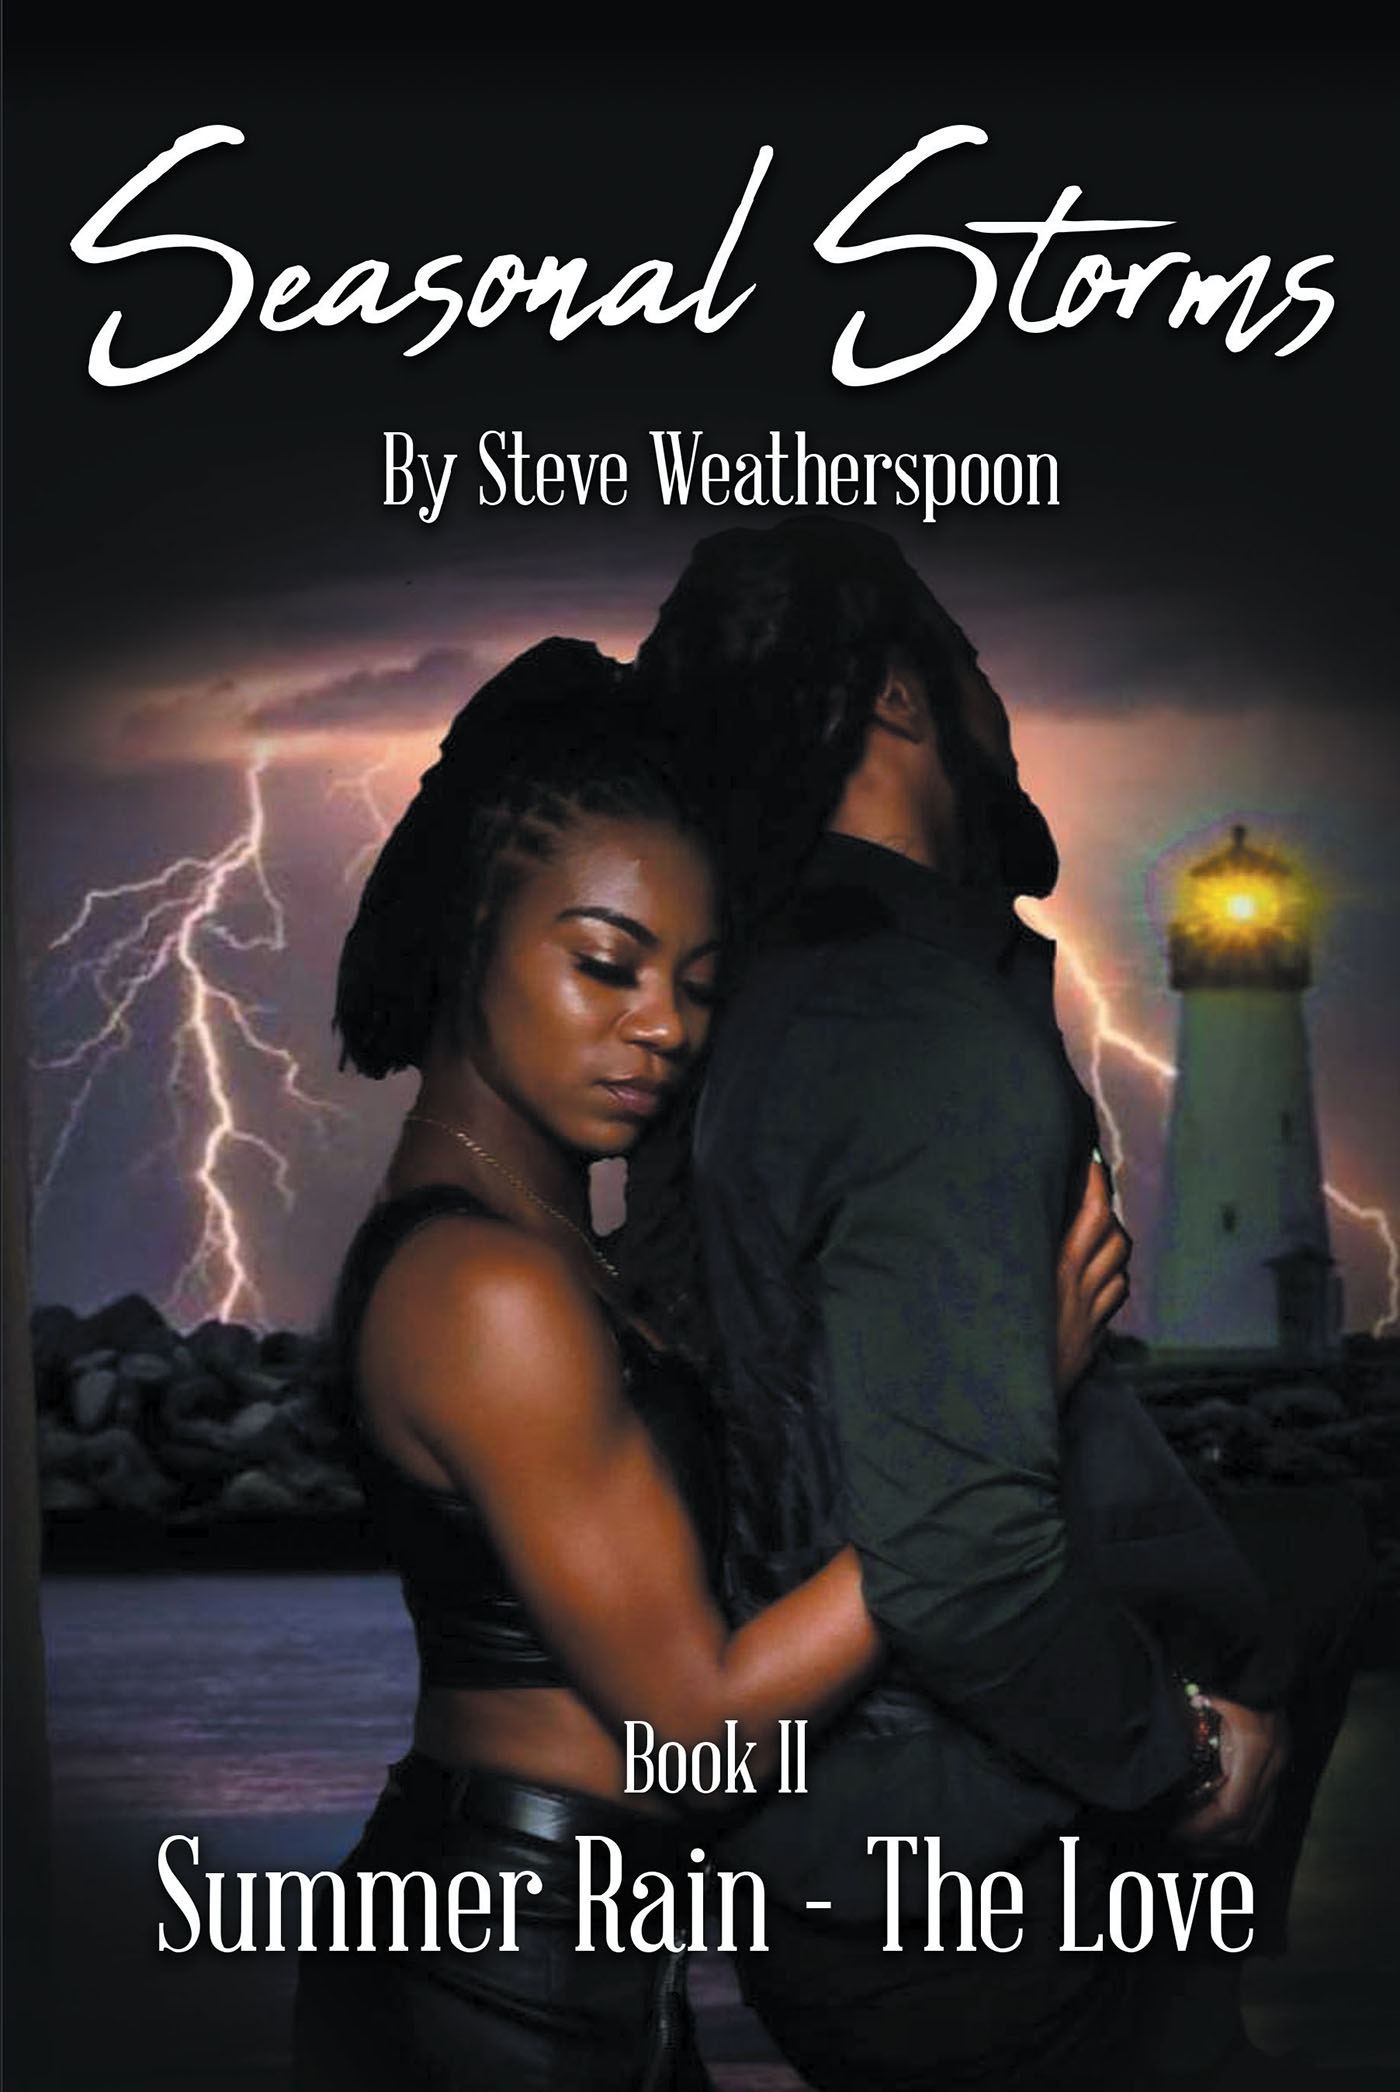 Author Steve Weatherspoon’s New Book, “Seasonal Storms – Summer Rain – The Love: Book II,” is the Second Installment in His Steamy Seasonal Storms Trilogy